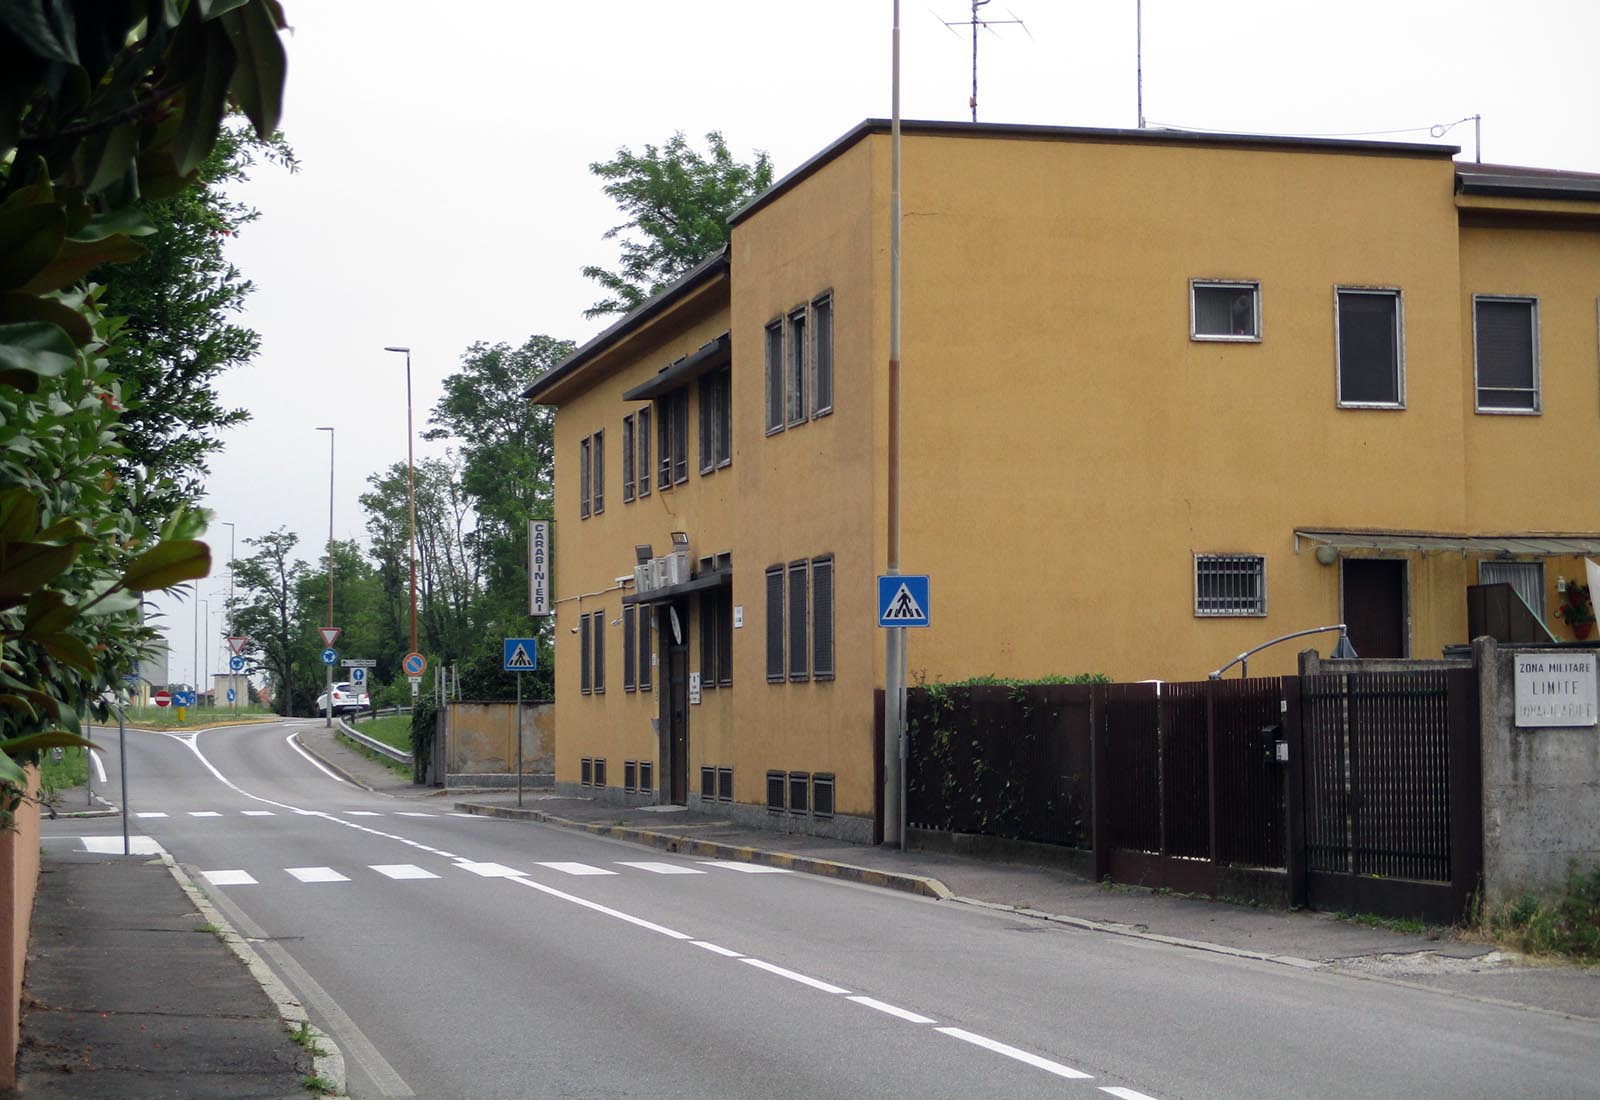 Adaptation to seismic standards of police station in Parabiago - View of the existing building